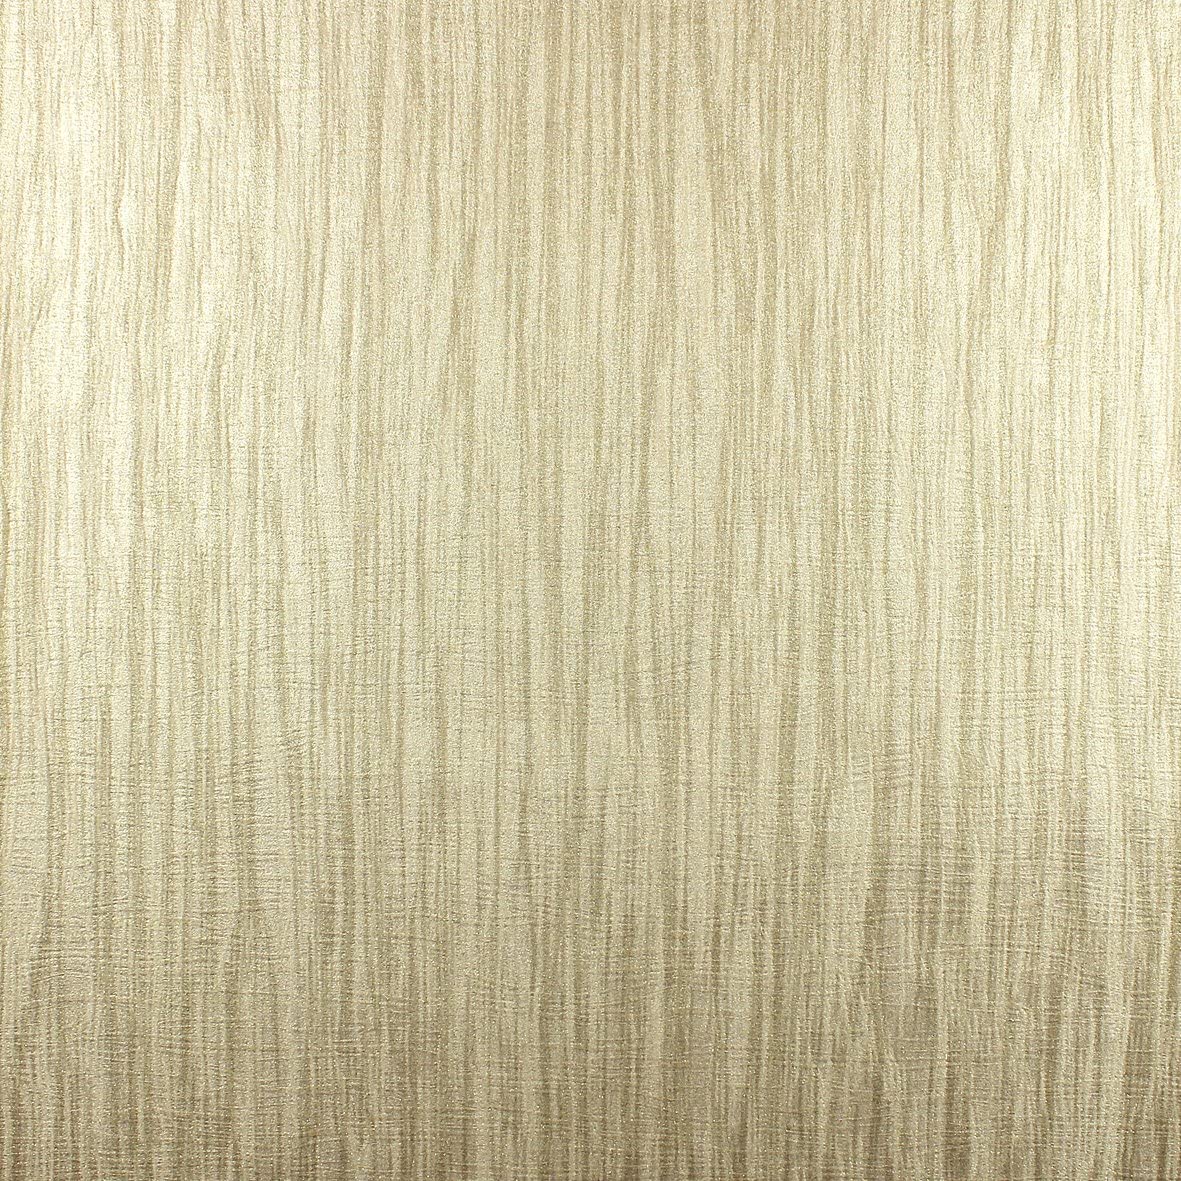 BHF M95562 Milano 4 Texture Gold Wallpaper, Set of 2 Pieces